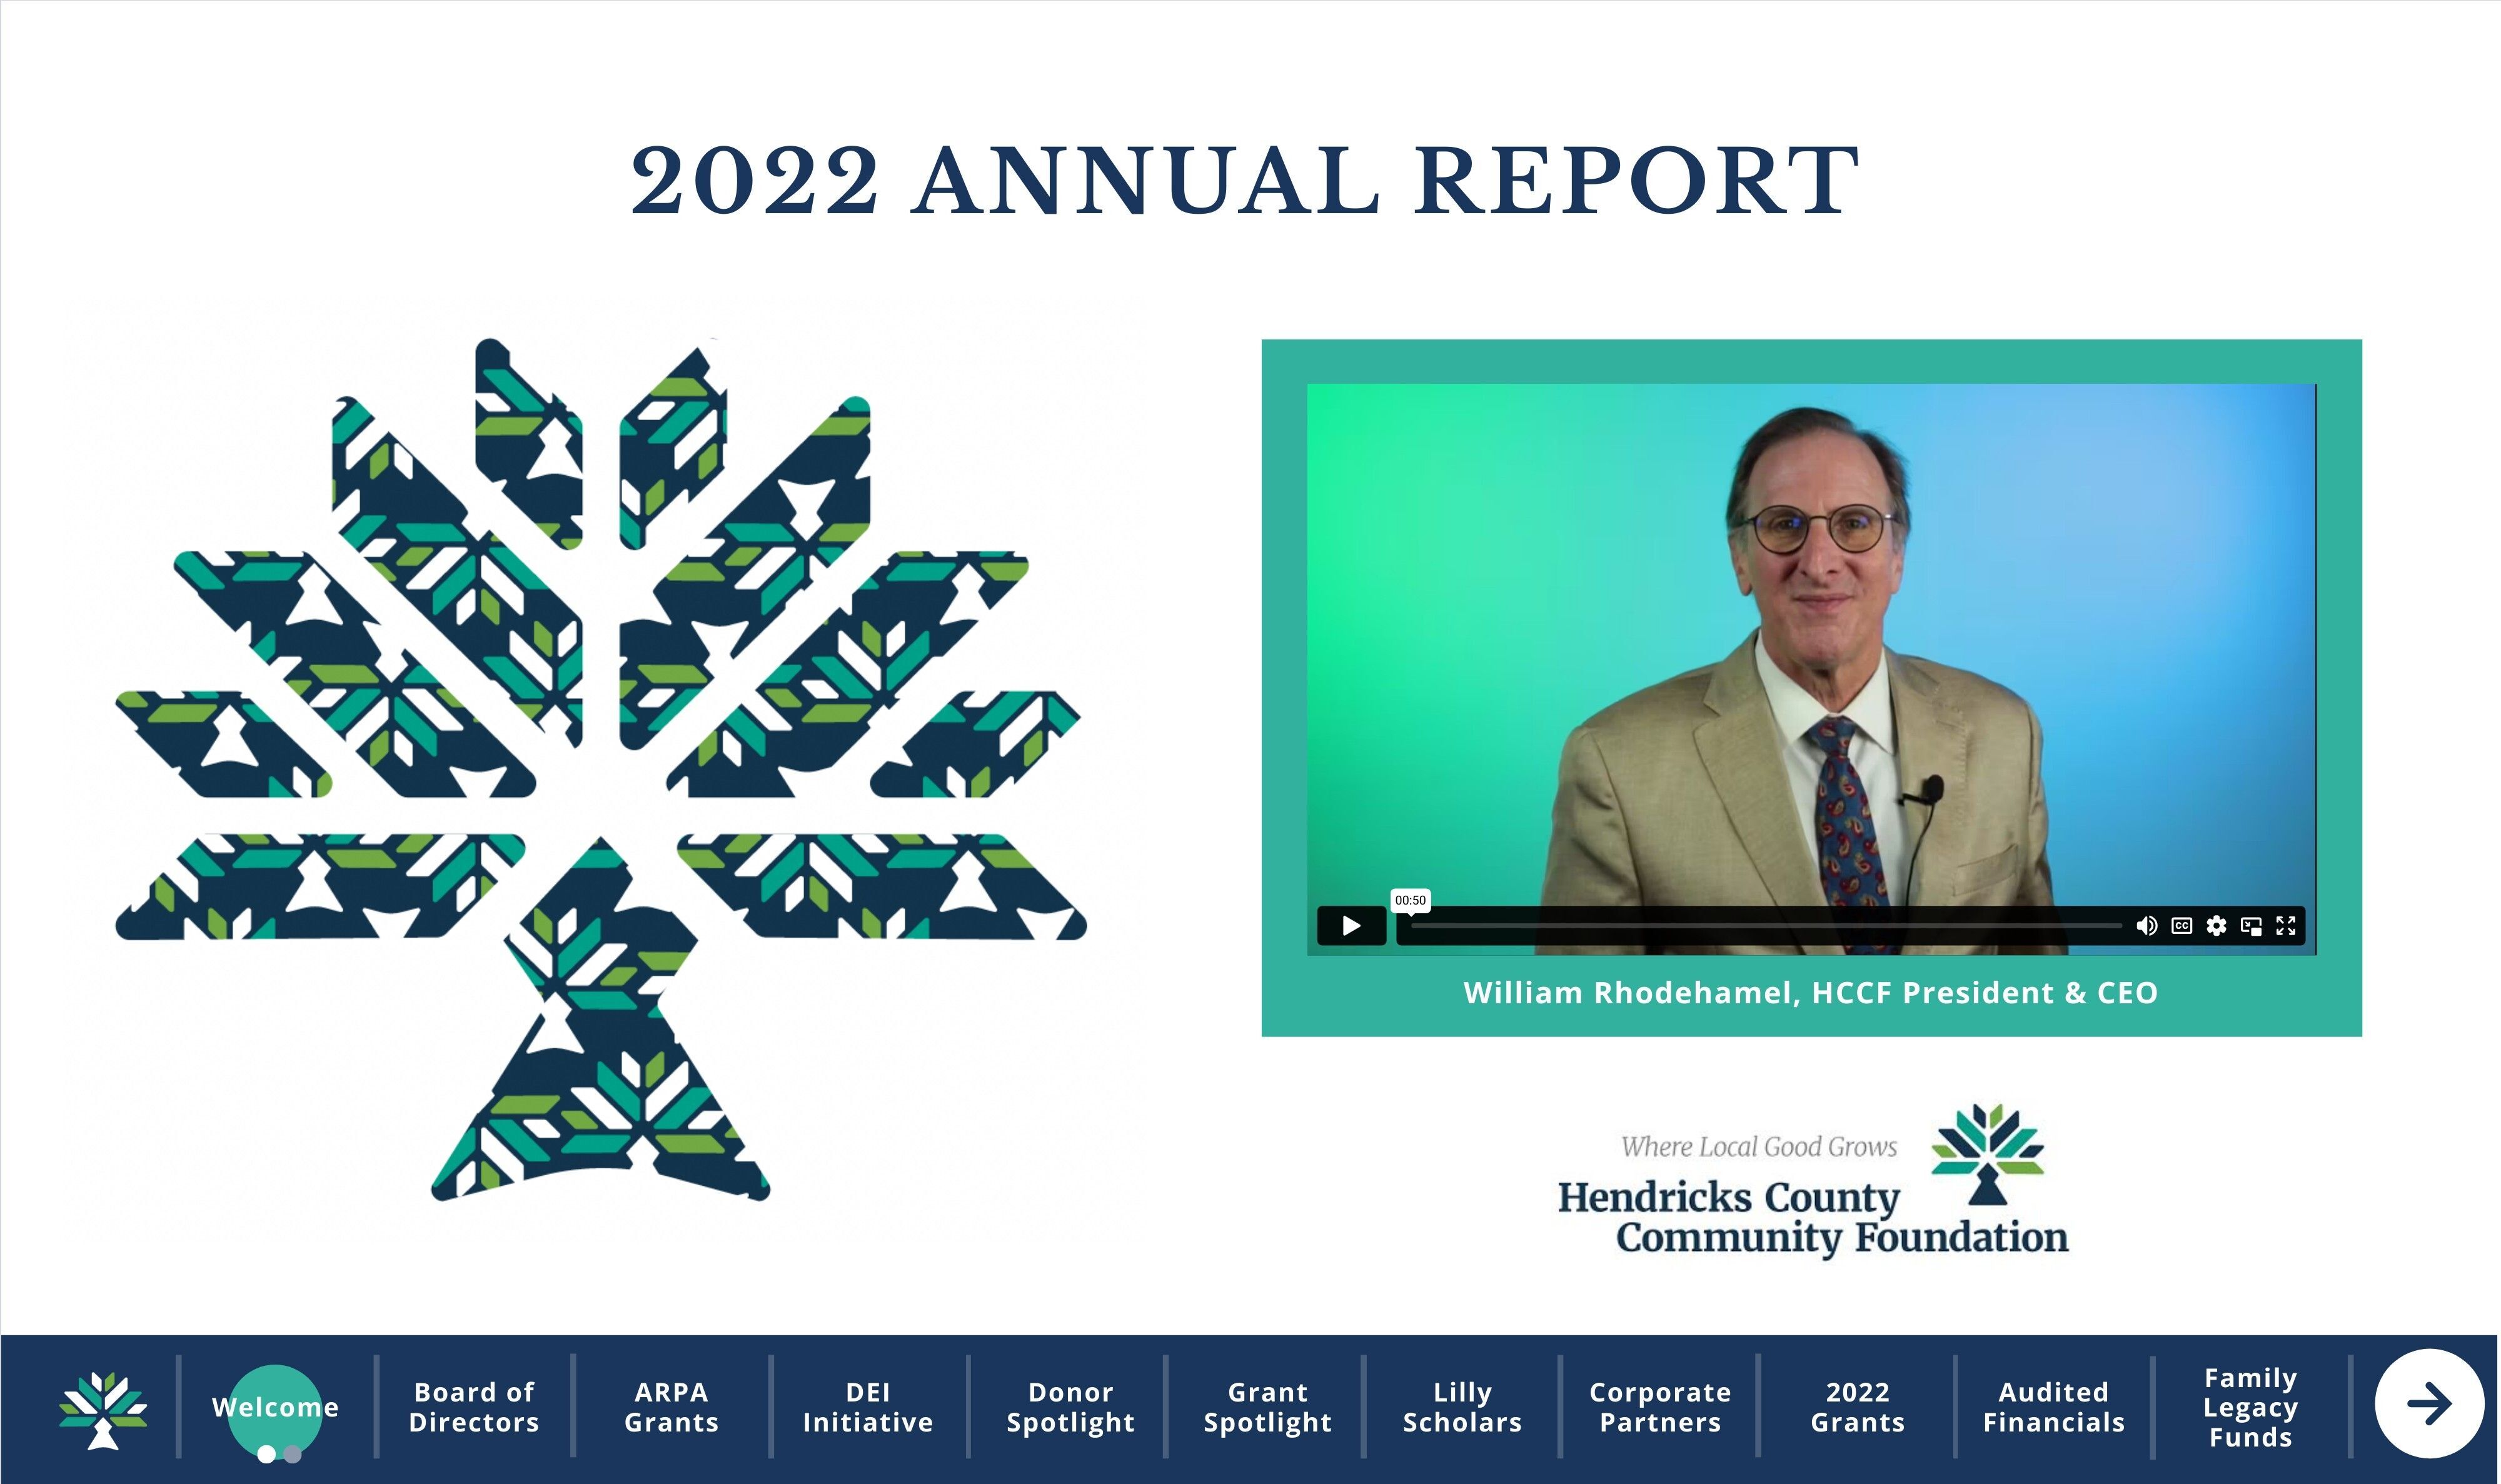 Our Annual Report is Here!